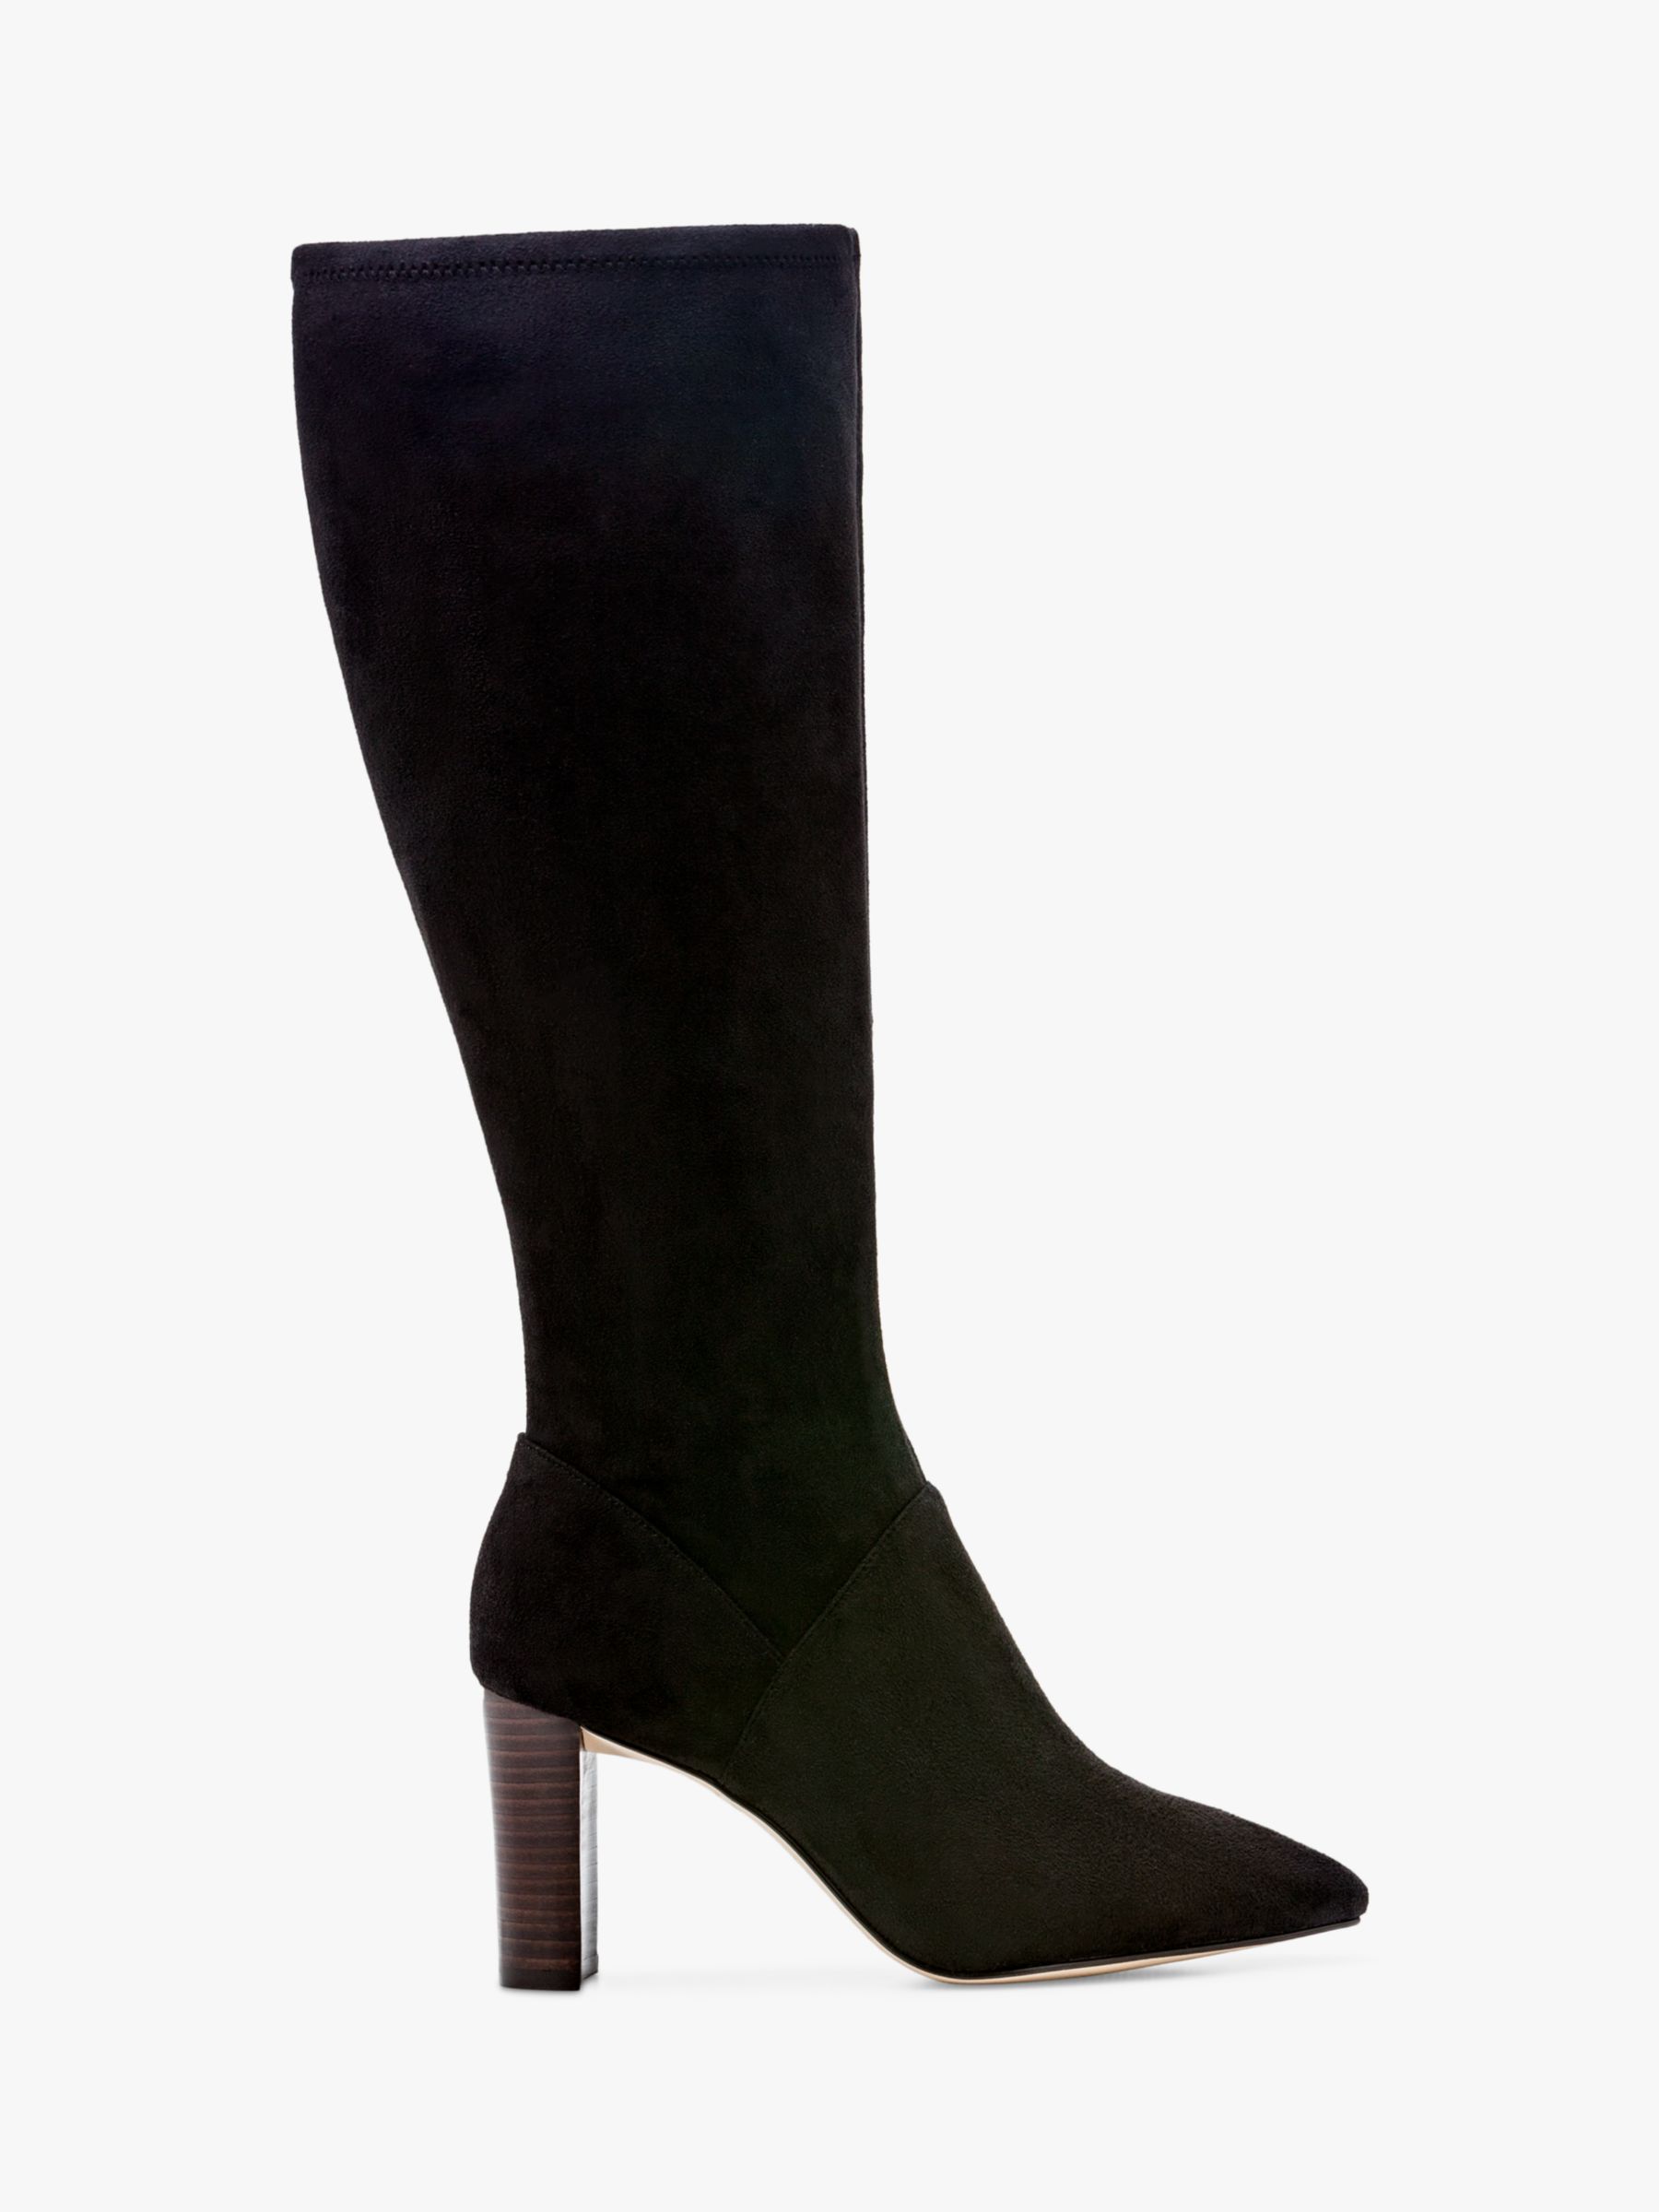 Boden Pointed Stretch Knee High Boots, Black at John Lewis & Partners